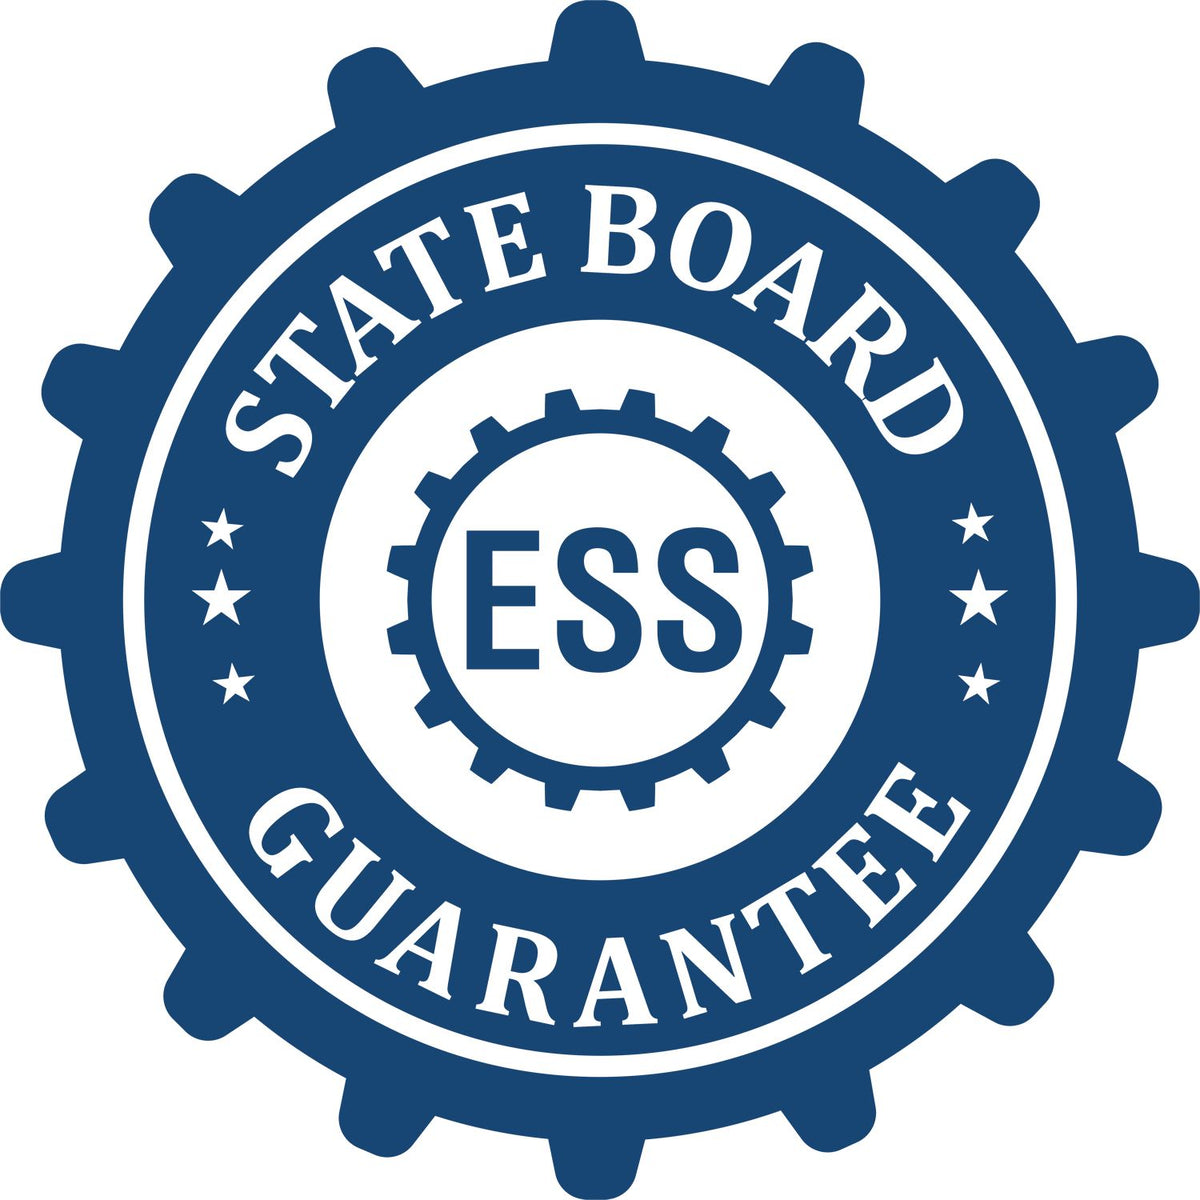 An emblem in a gear shape illustrating a state board guarantee for the Wooden Handle Alabama State Seal Notary Public Stamp product.